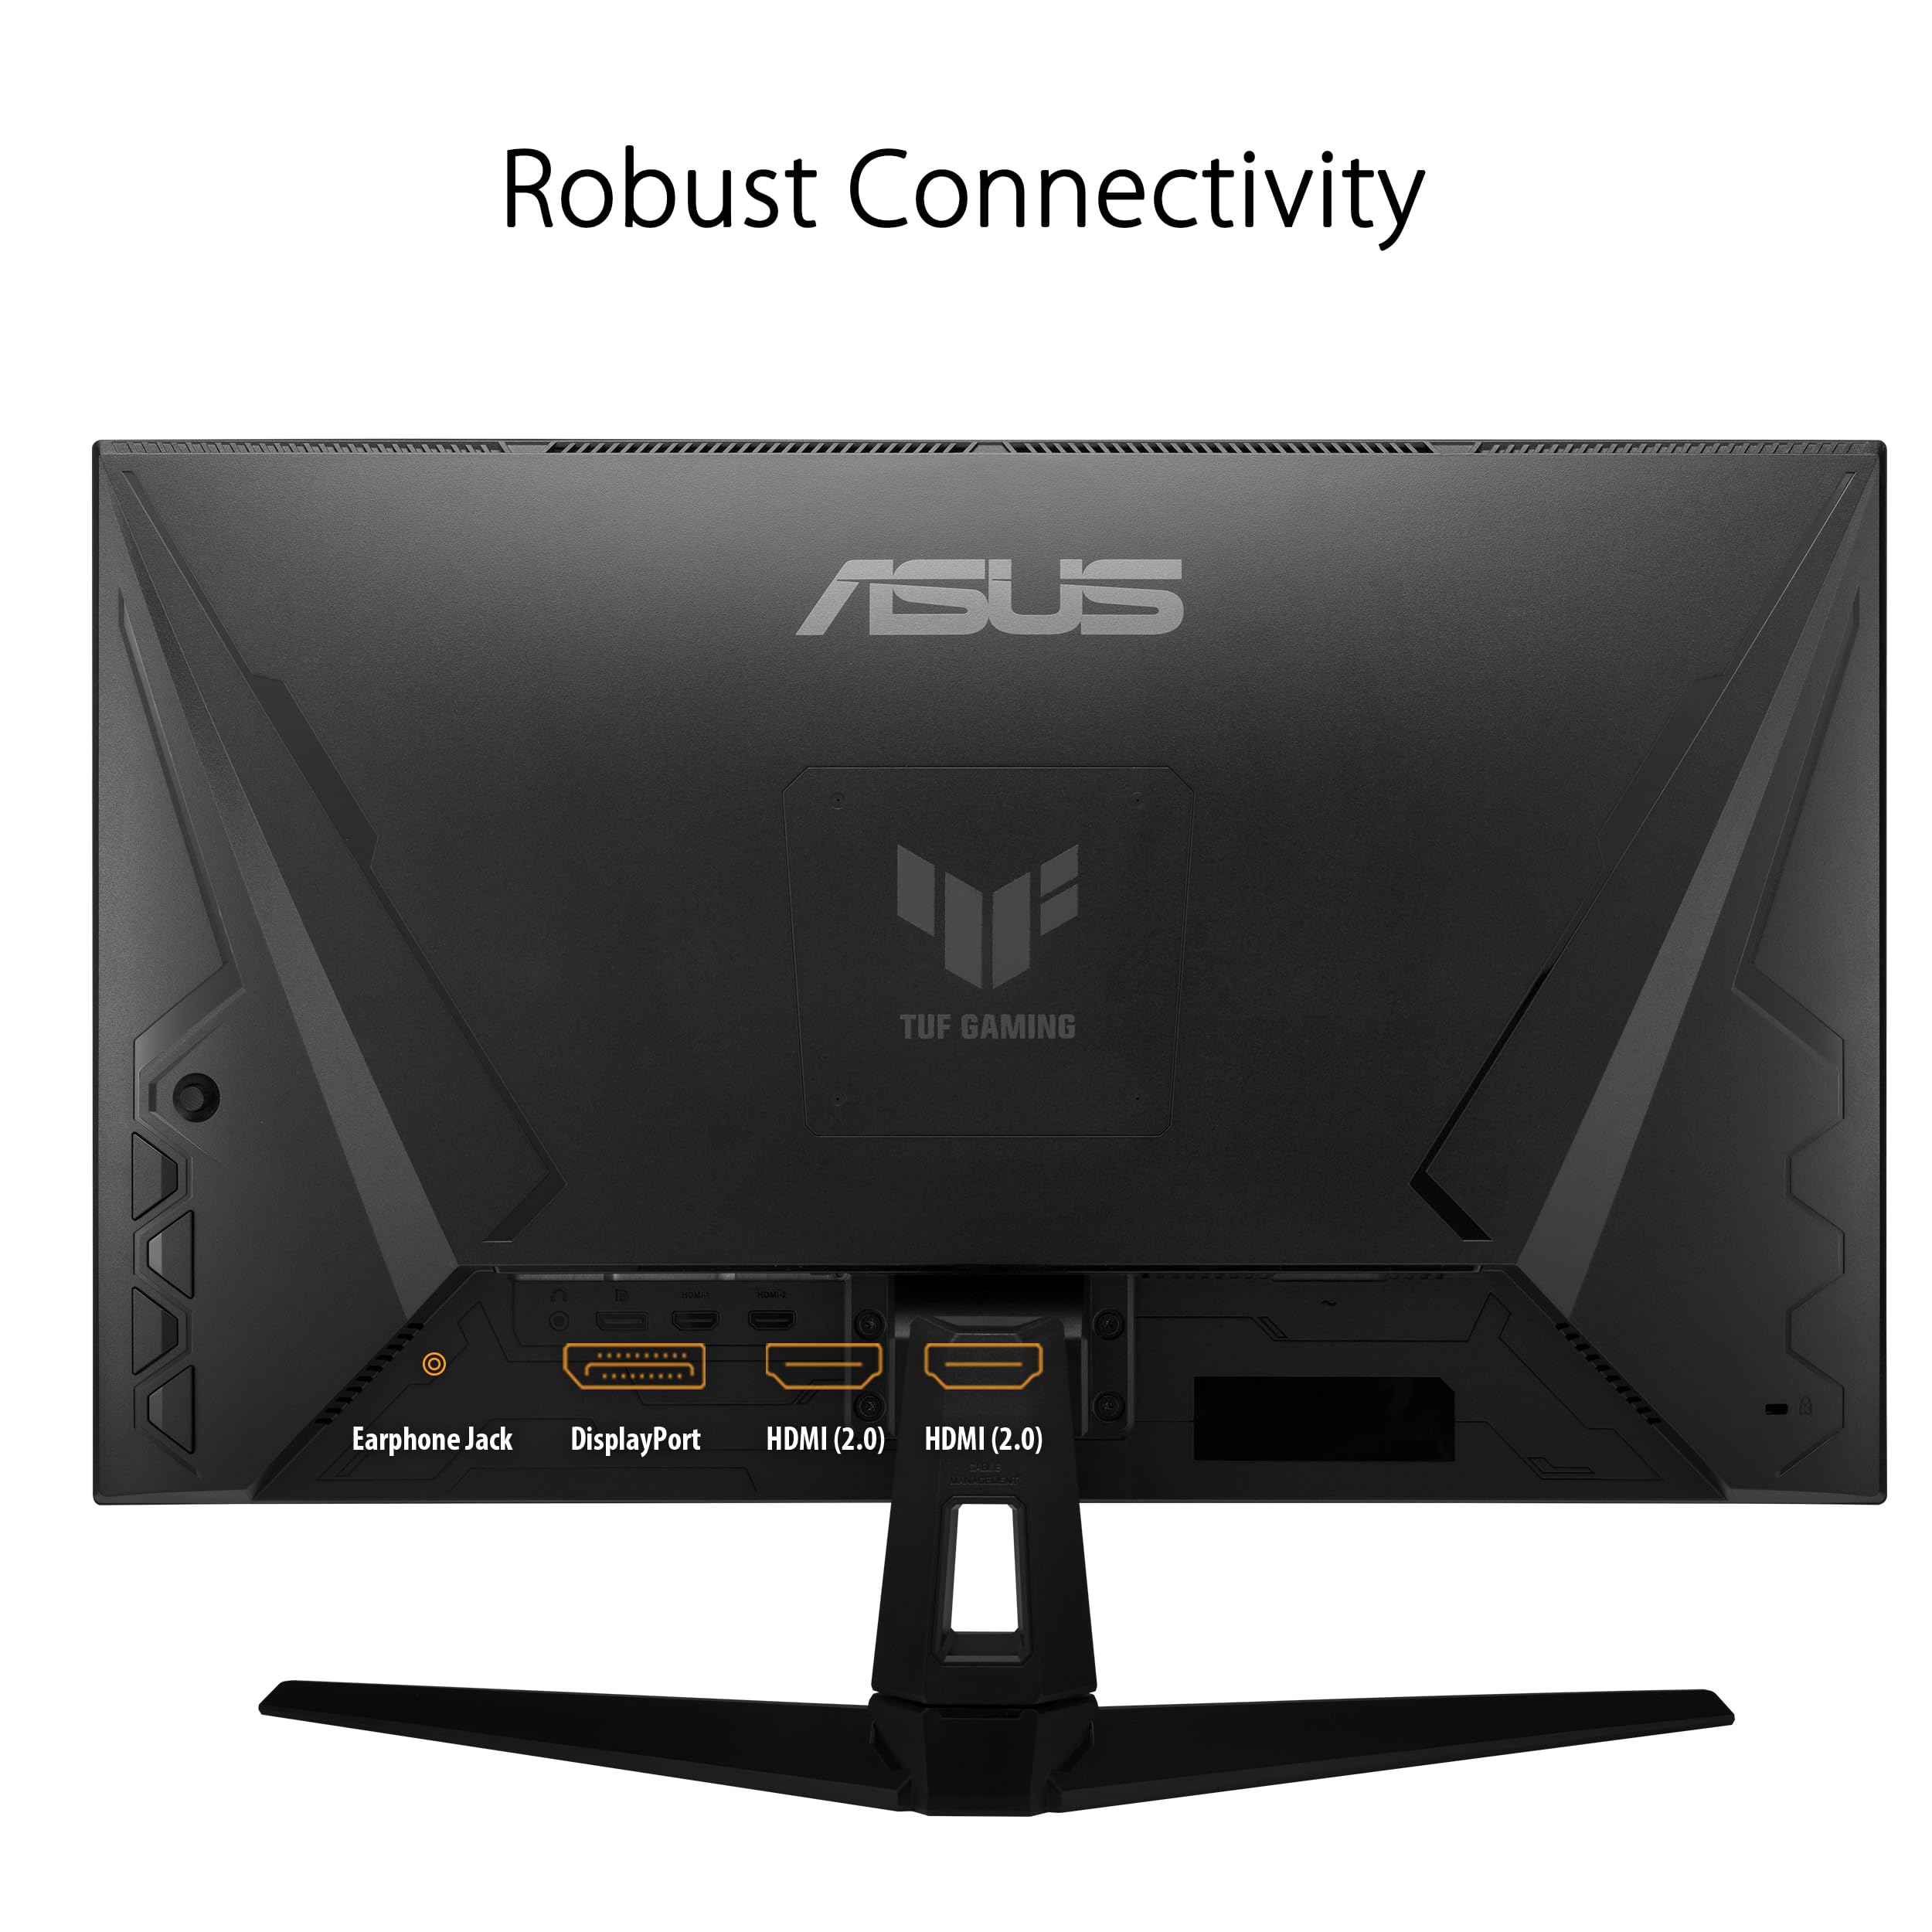 ASUS TUF Gaming 27” 1080P HDR Monitor (VG279QM1A) - Full HD (1920 x 1080), 280Hz, 1ms, Fast IPS, Extreme Low Motion Blur Sync, Freesync Premium, G-SYNC Compatible, Speakers, Variable Overdrive,Black